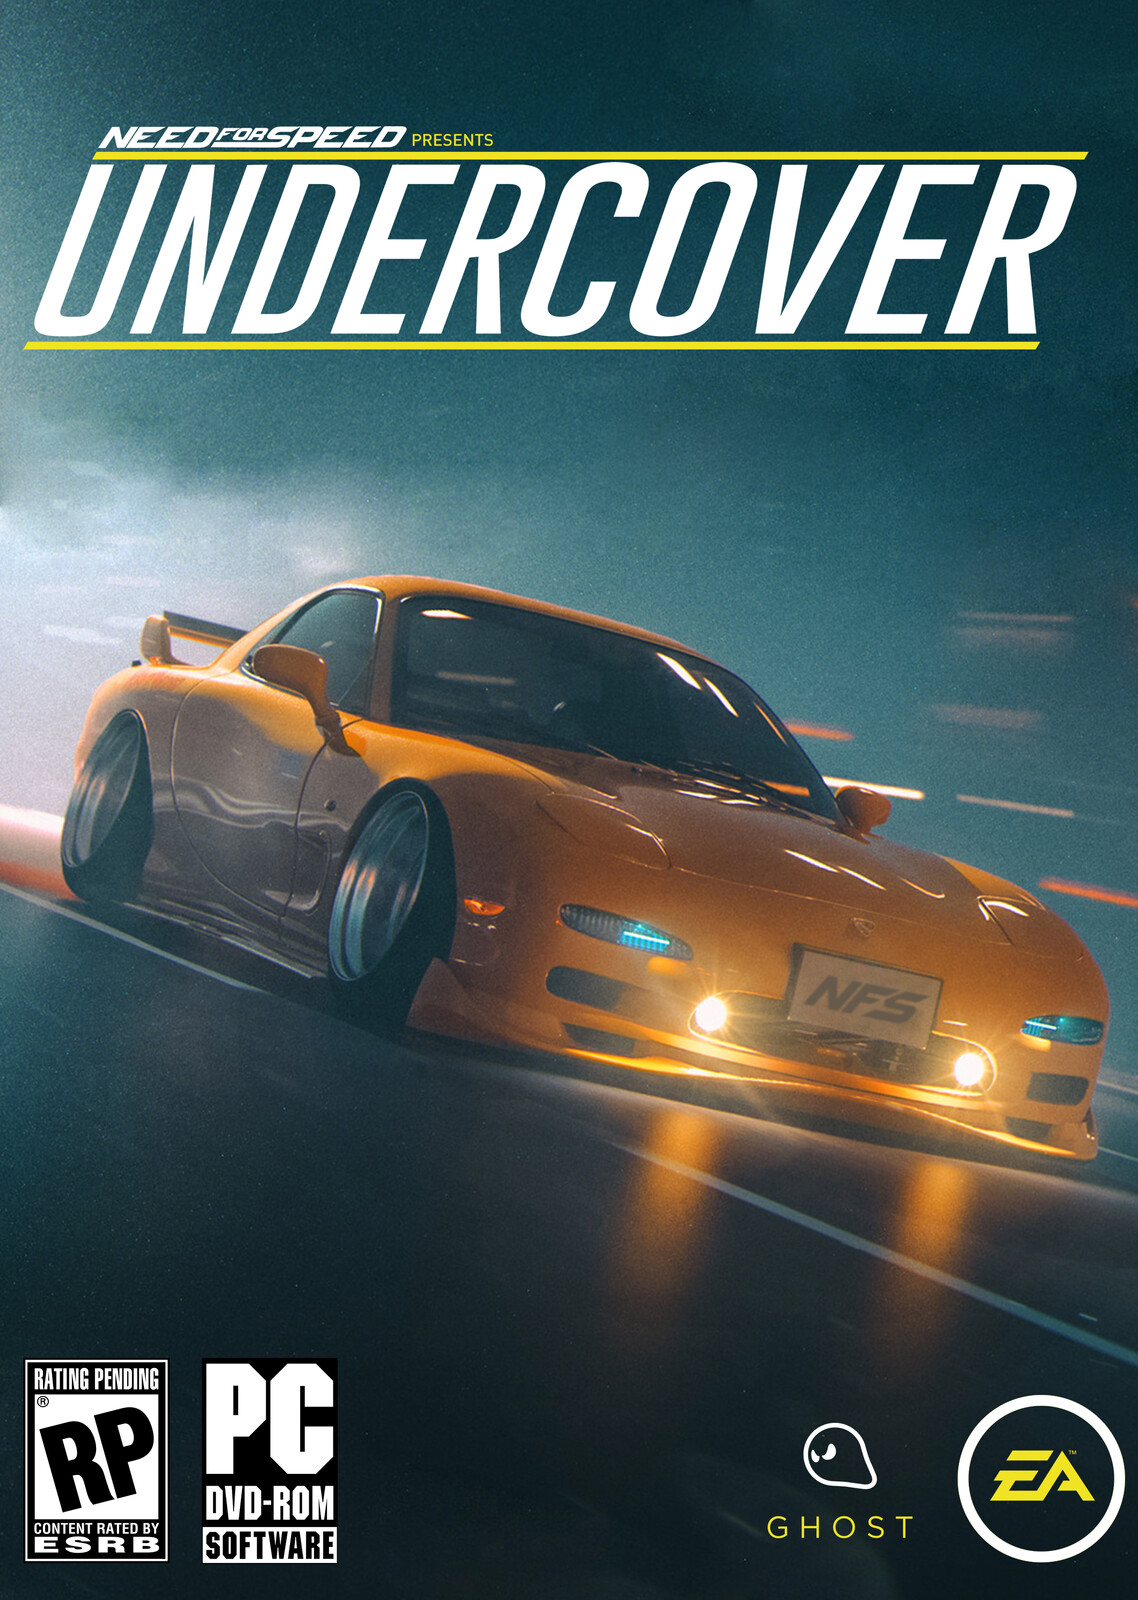 Need for Speed™ Presents: Undercover (Based on Khyzyl Saleem art)